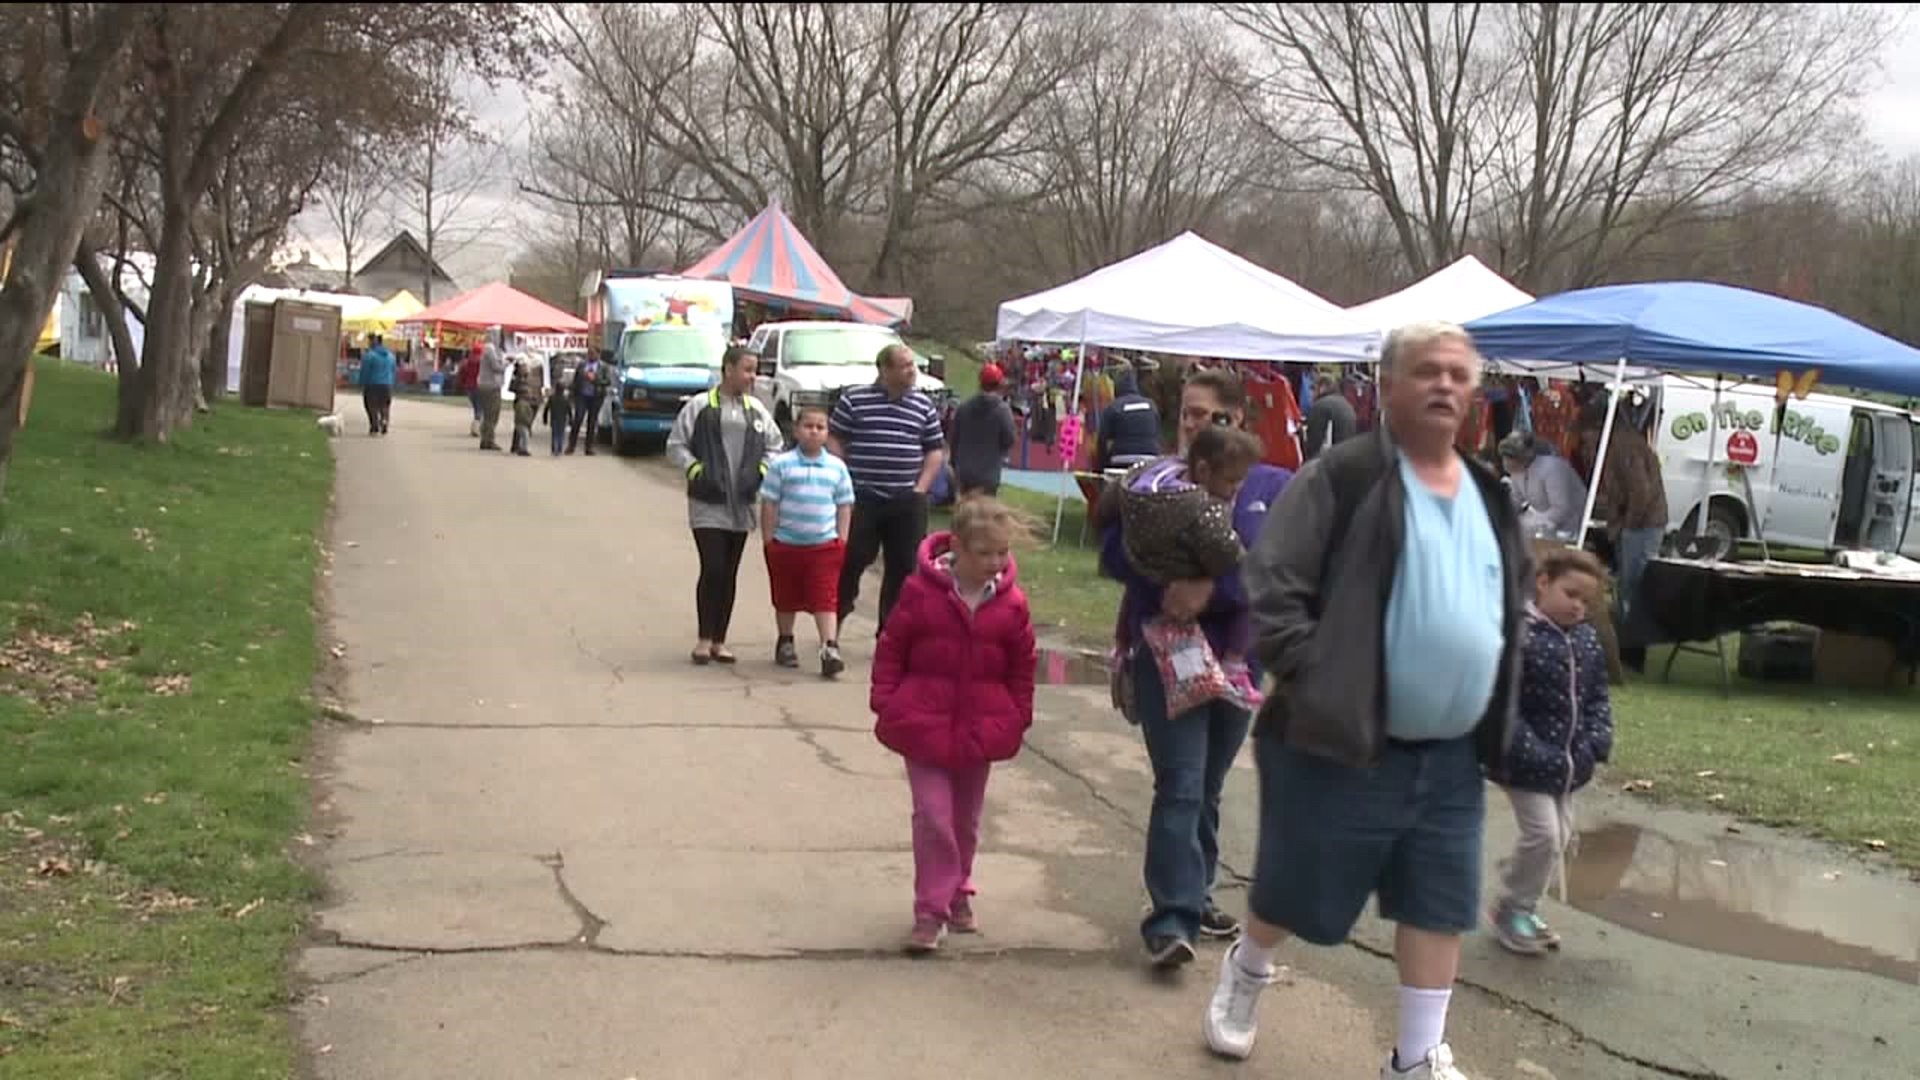 41st Annual Cherry Blossom Festival in WilkesBarre